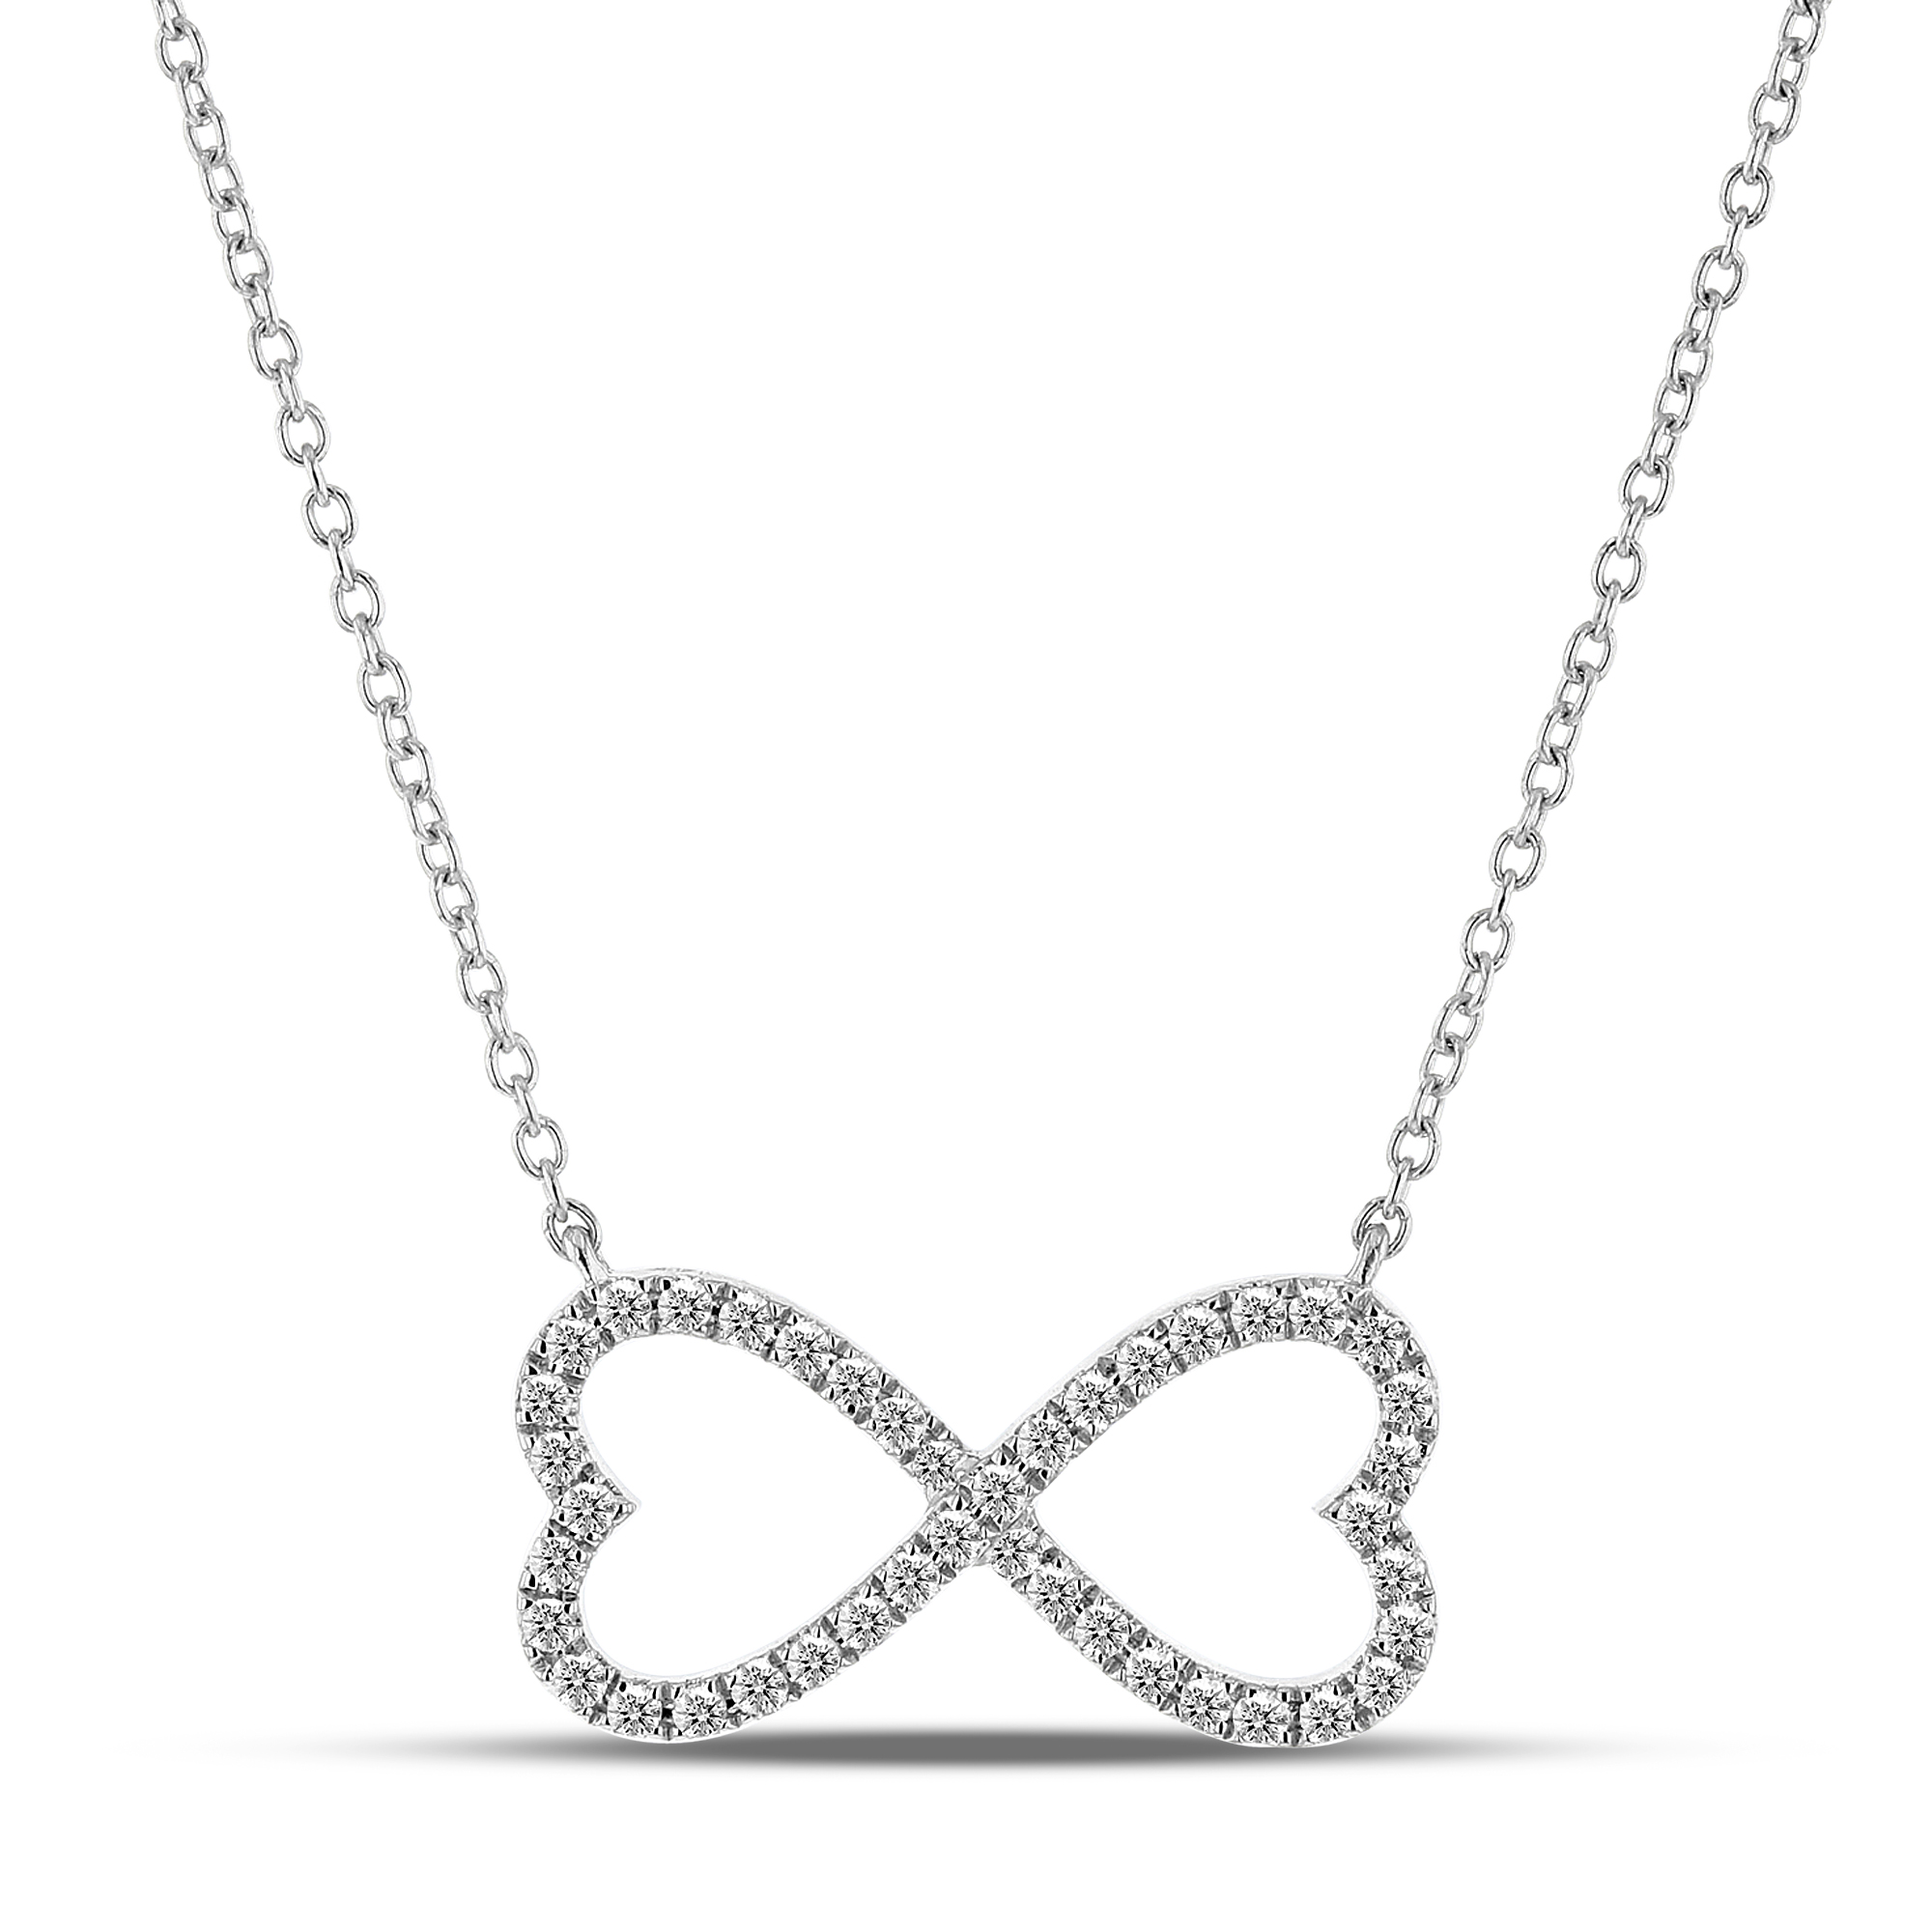 View 0.17ctw Diamond Double Heart Necklace in 14k White Gold